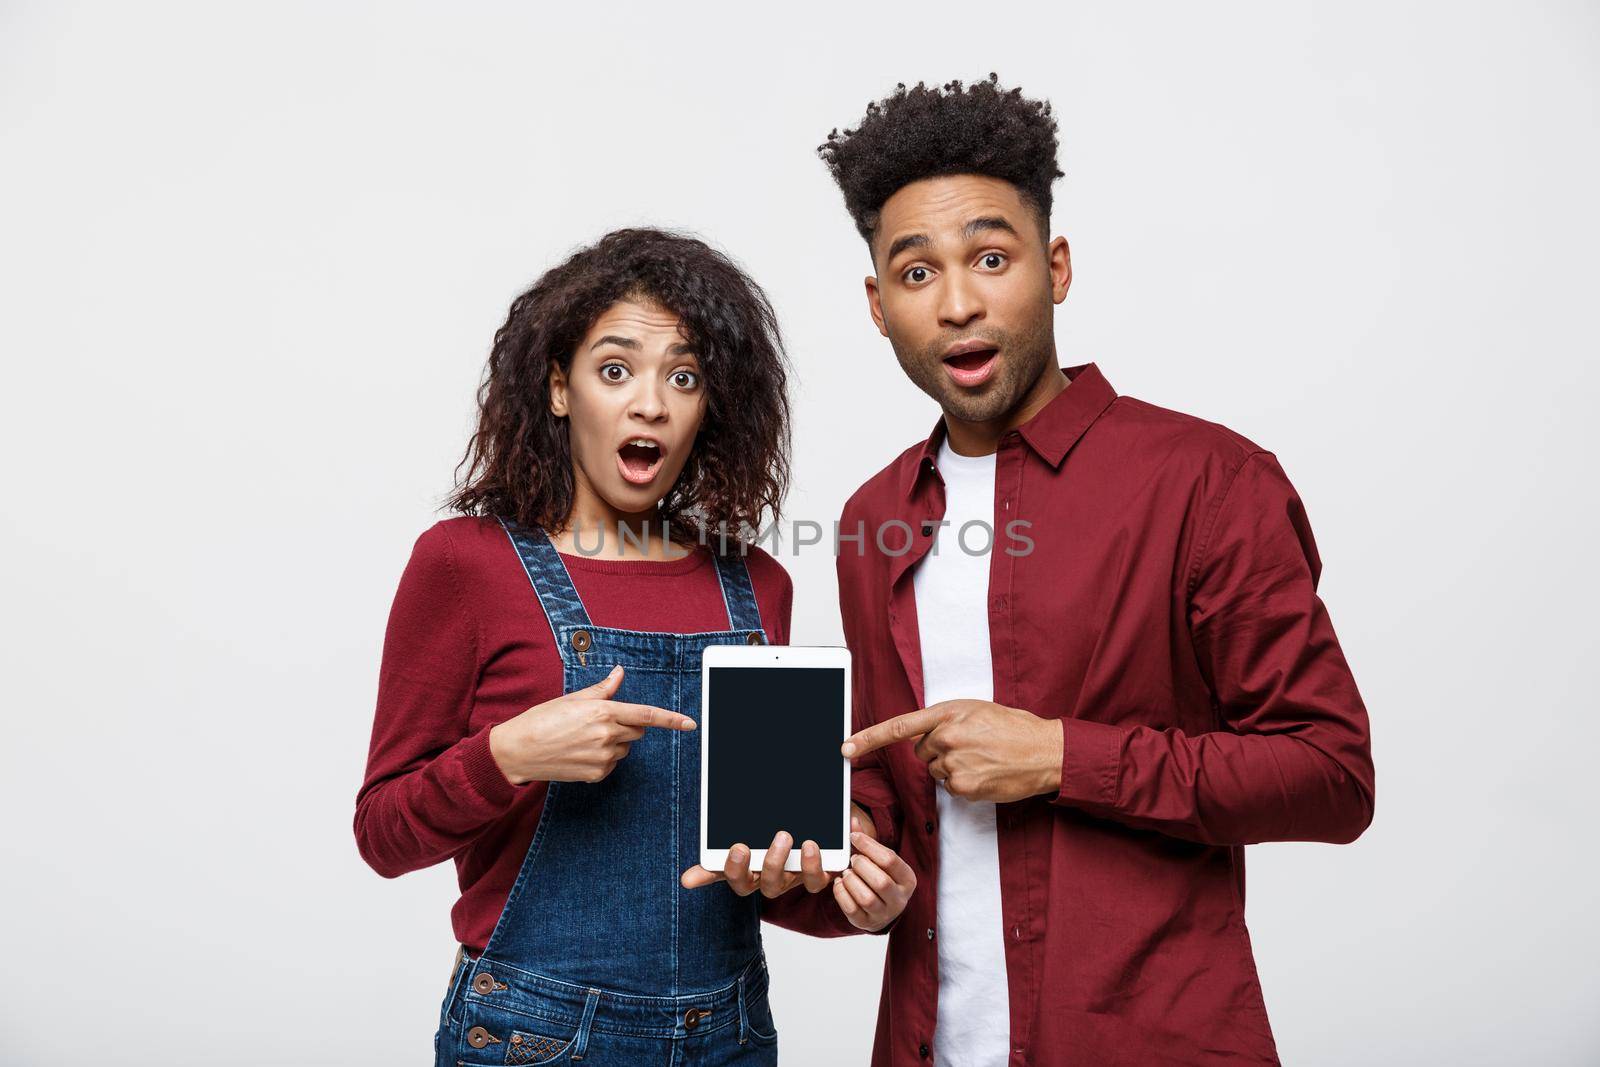 Portrait of African American couple holding table with shocking expression on white background.